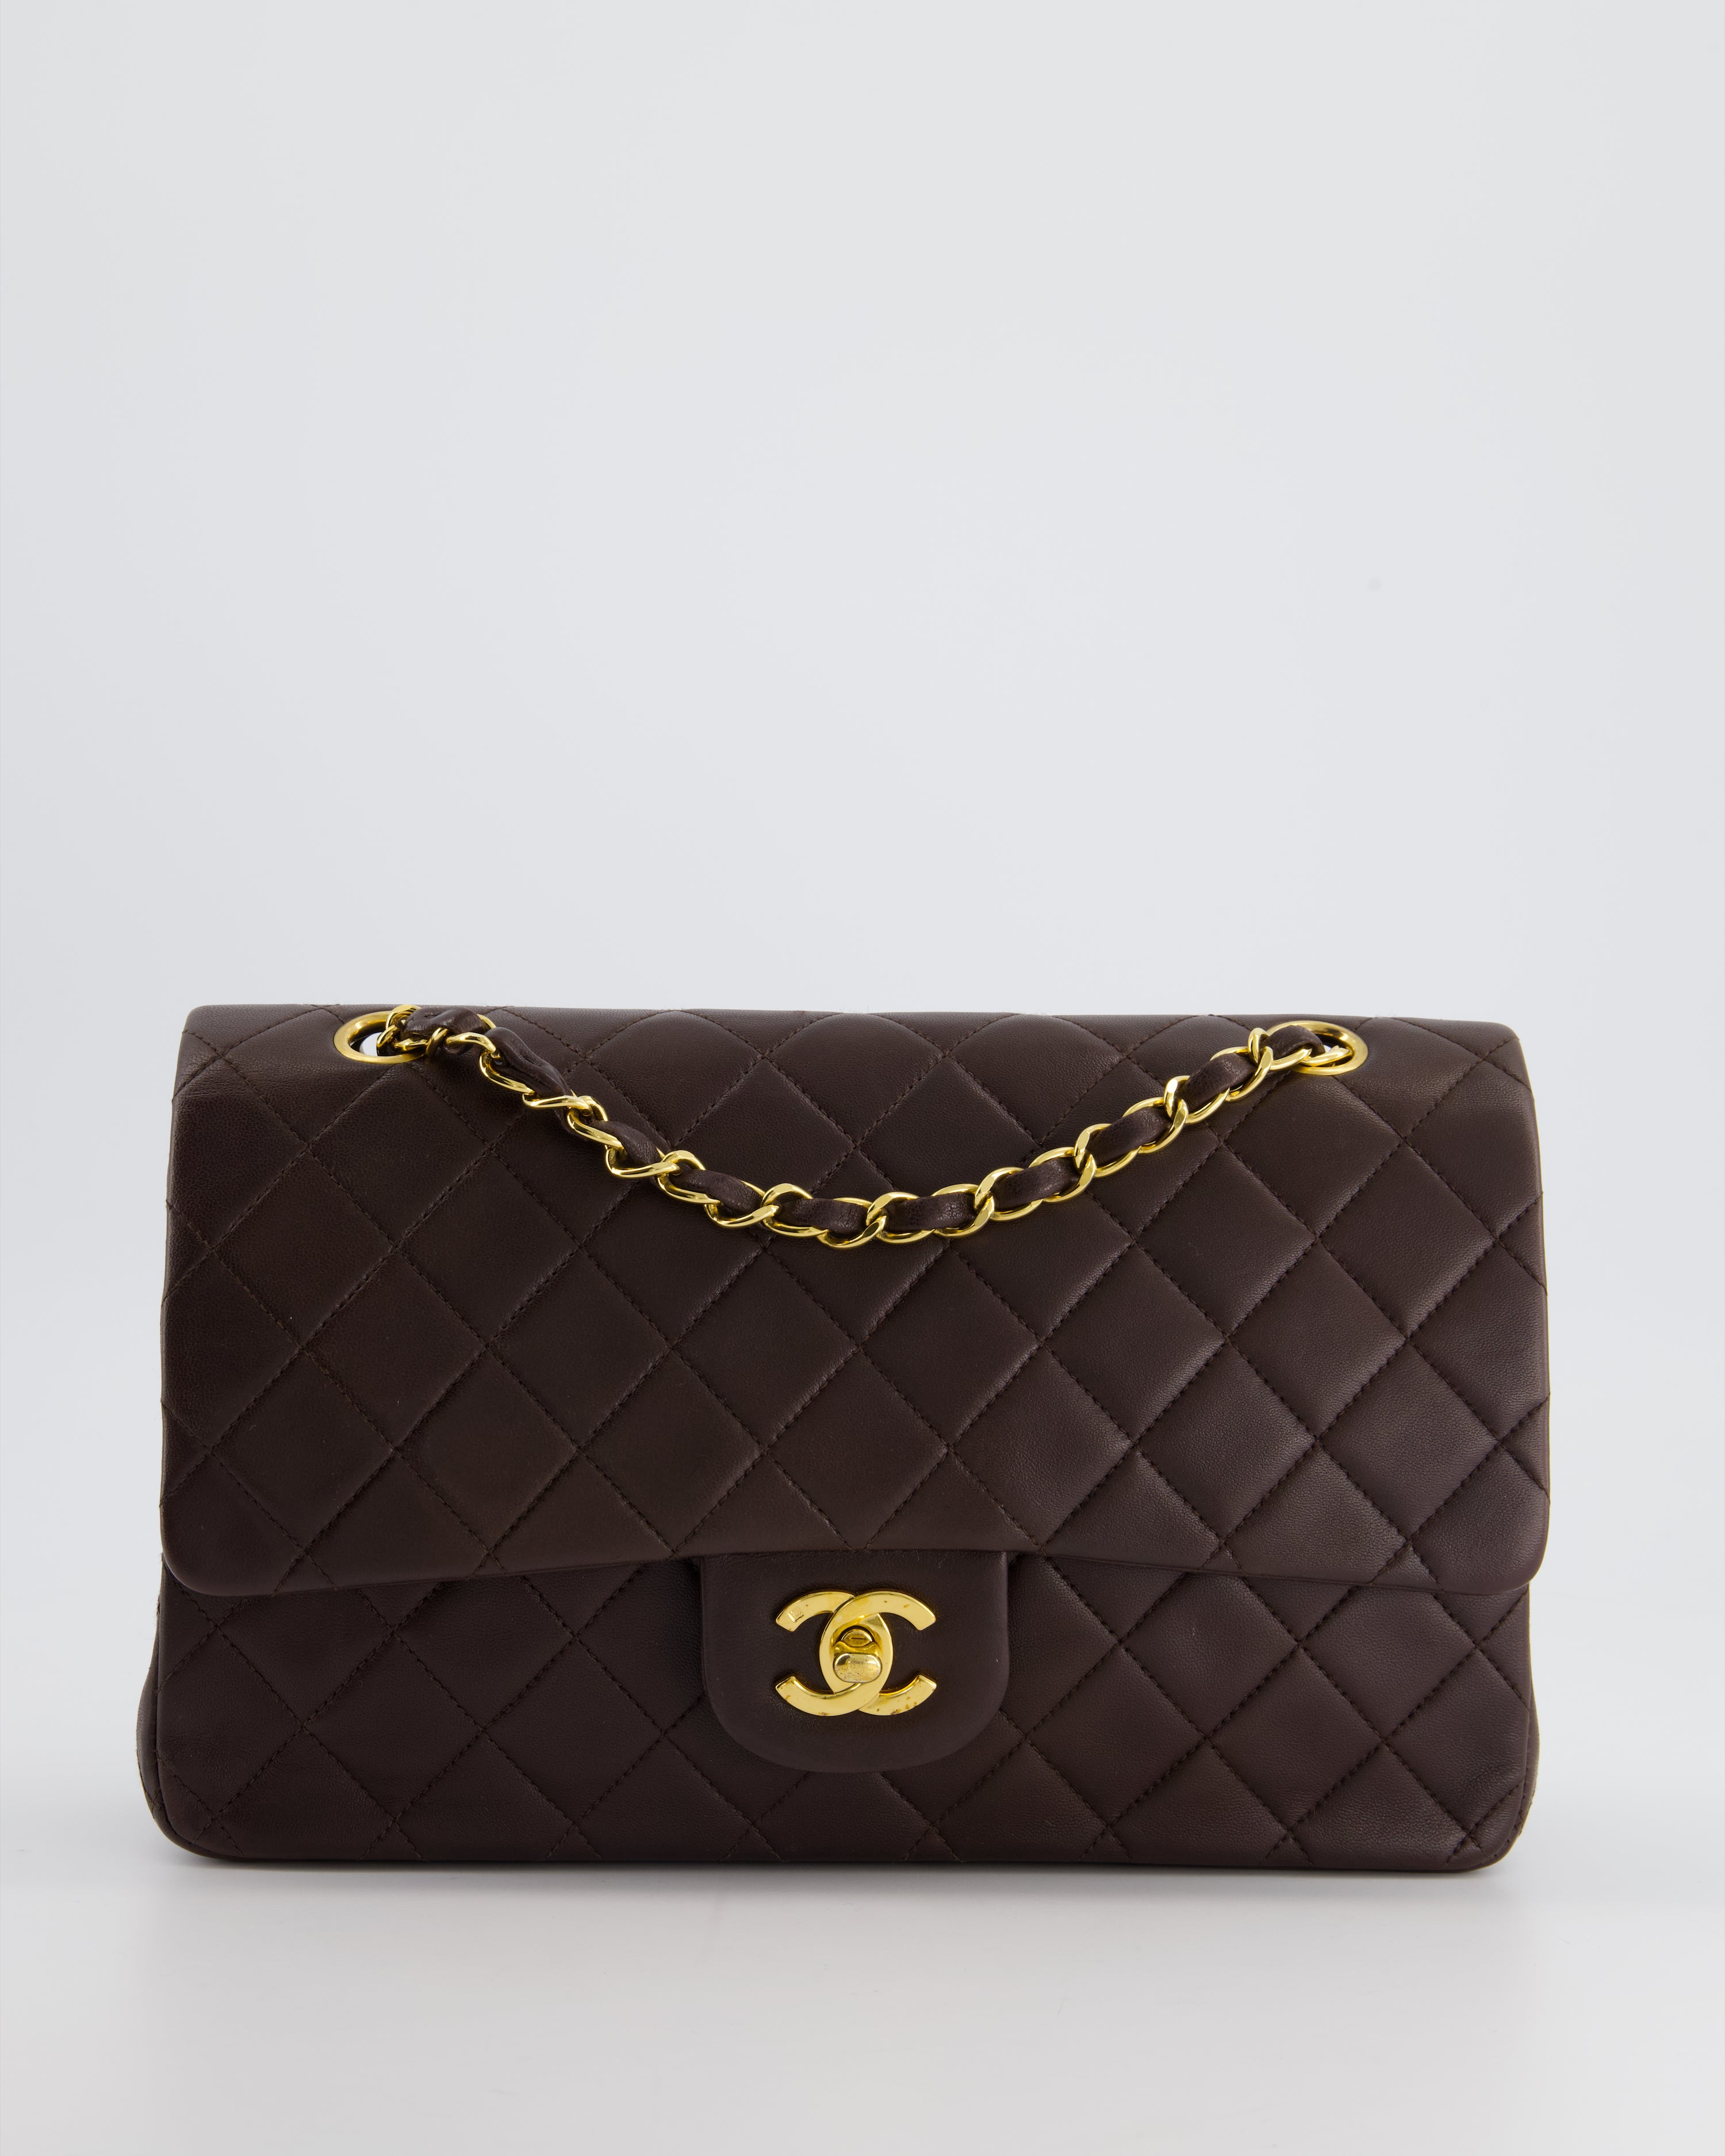 Authentic Chanel Mini Flap Bag with Top Handle Beige Lambskin Matte Gold  Hardware